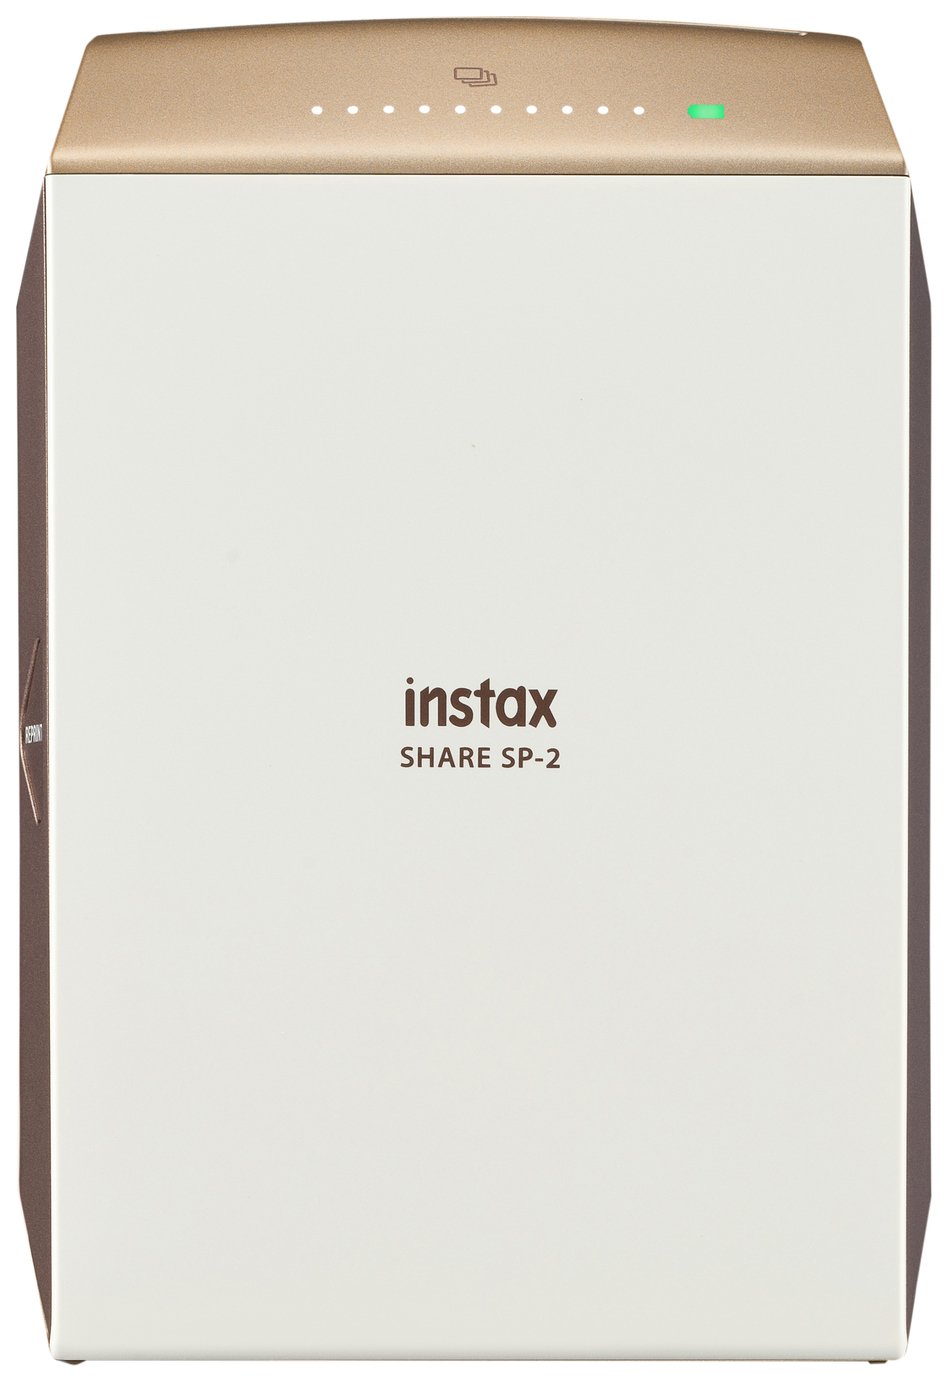 instax Share SP-2 Photo Printer with 10 shots- Gold